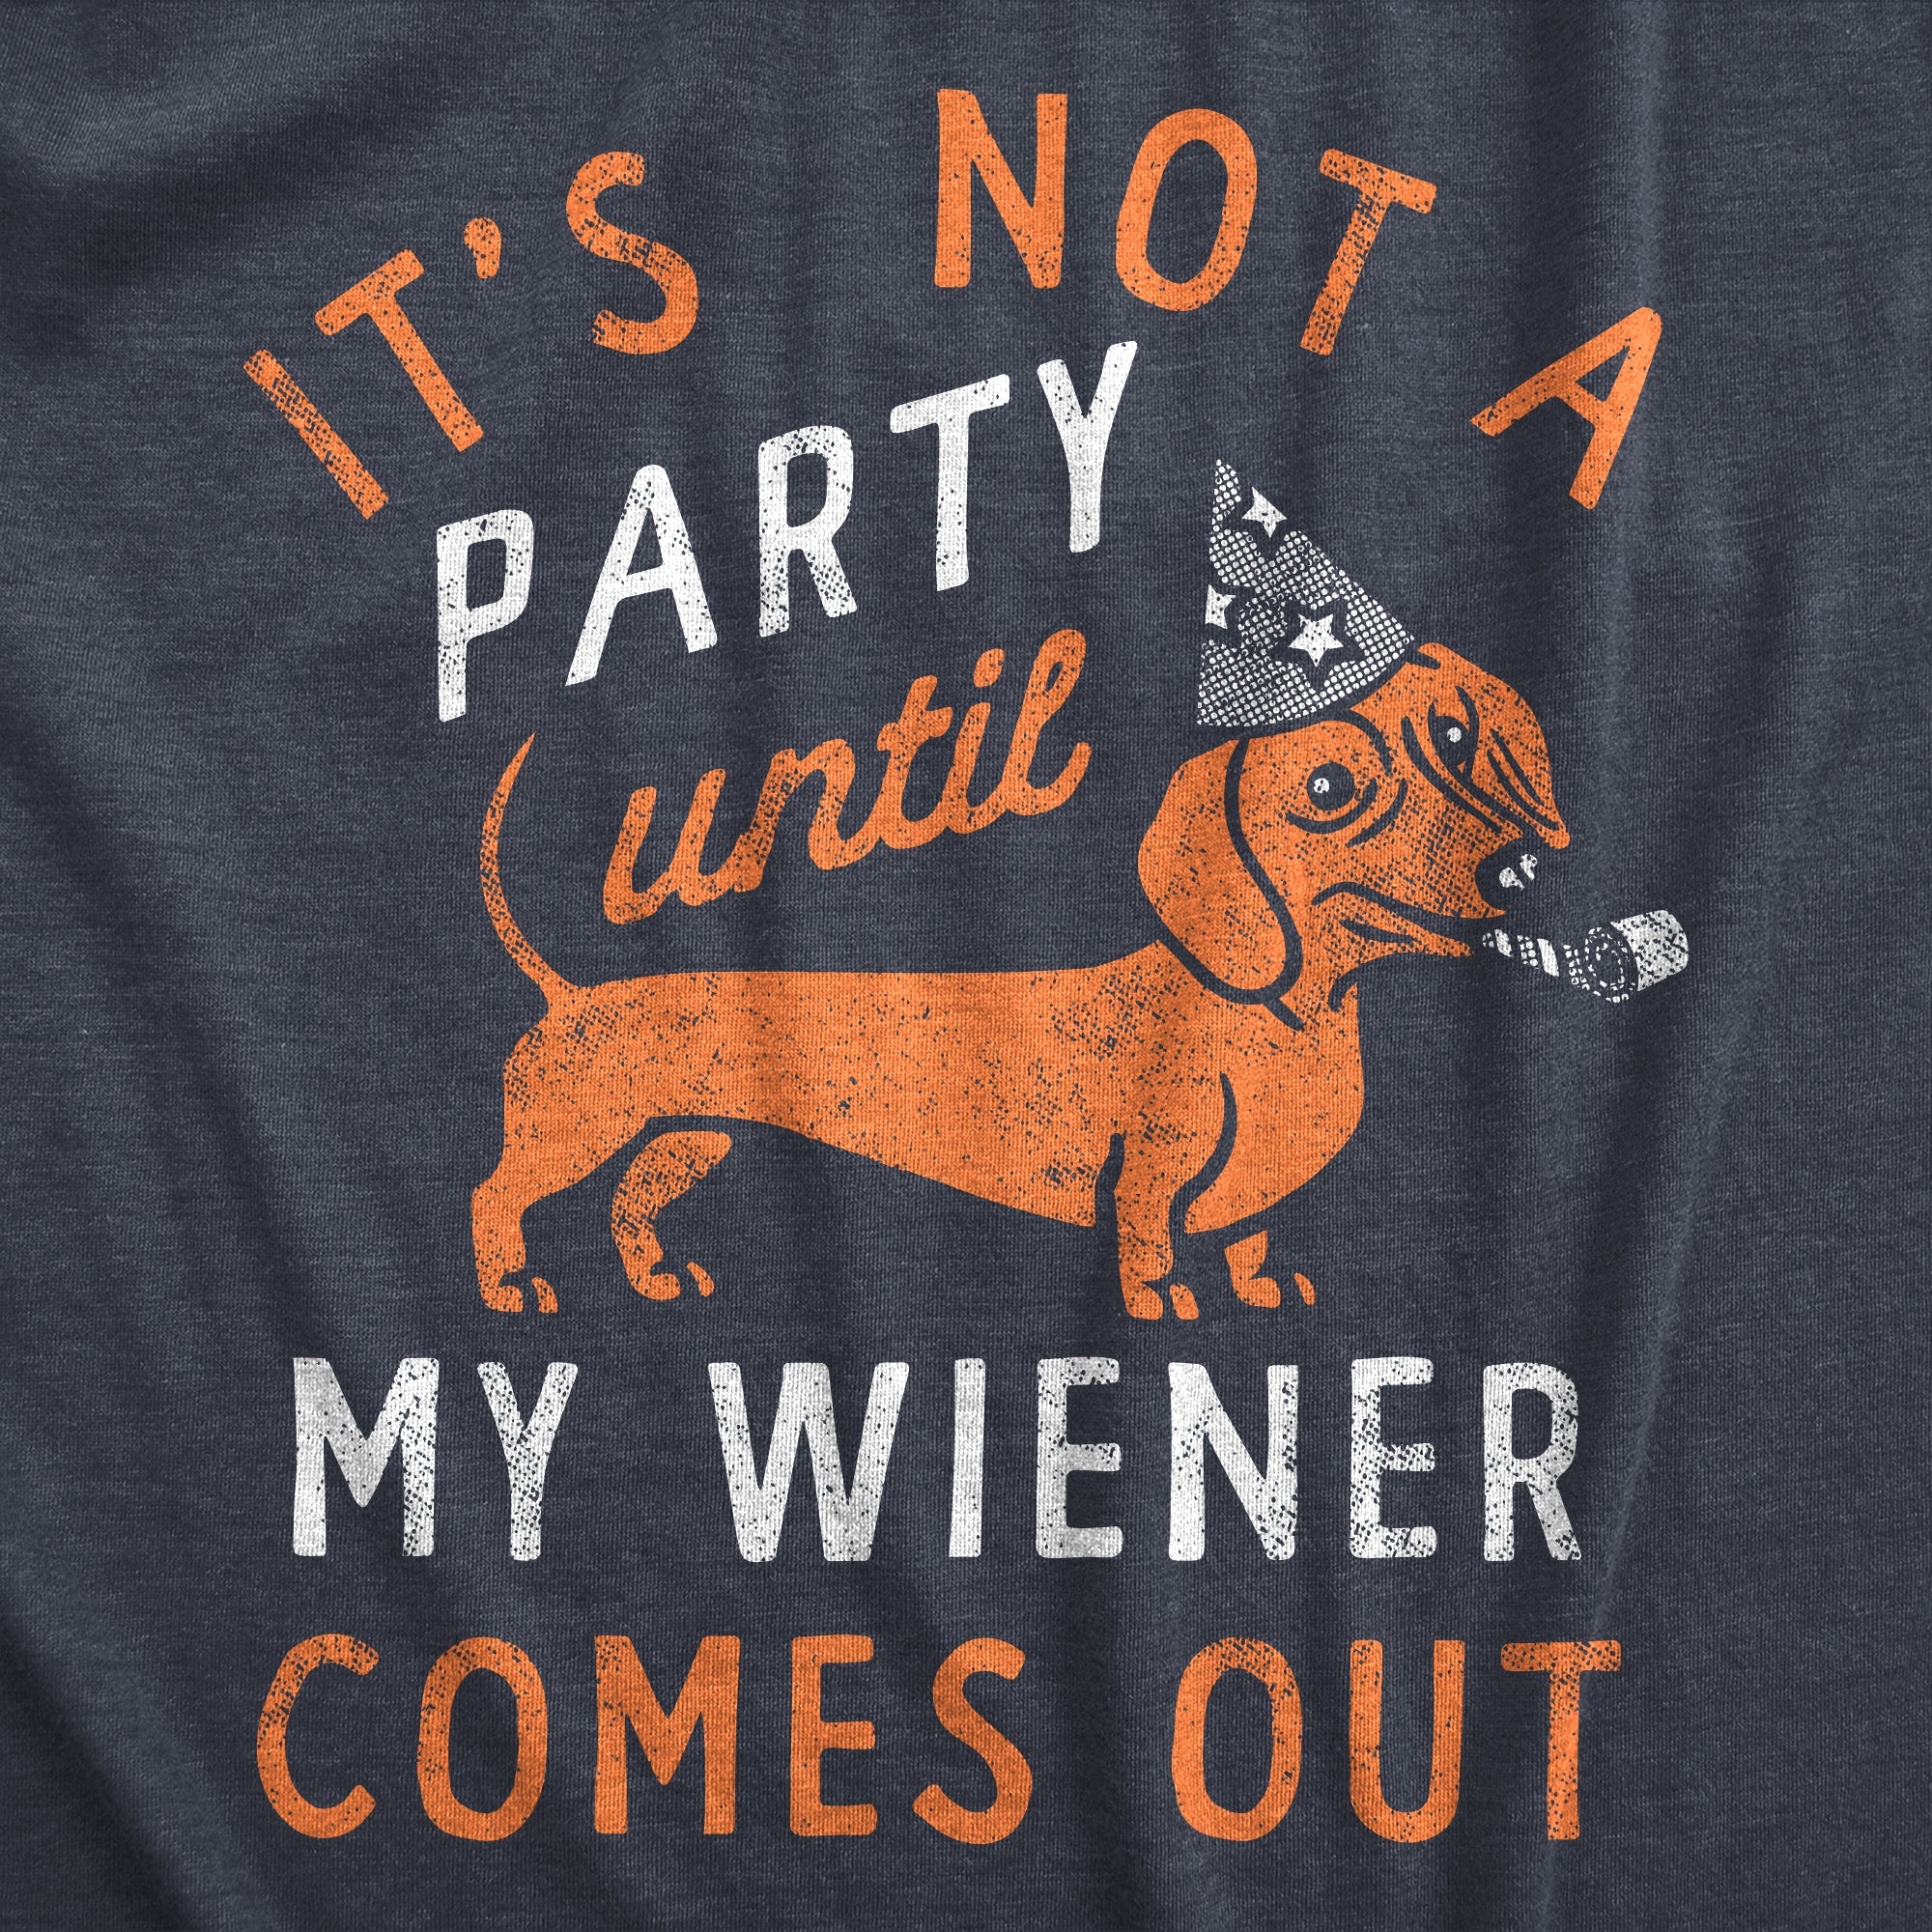 Funny Heather Navy - WIENER Its Not A Party Until My Wiener Comes Out Mens T Shirt Nerdy Sarcastic Tee